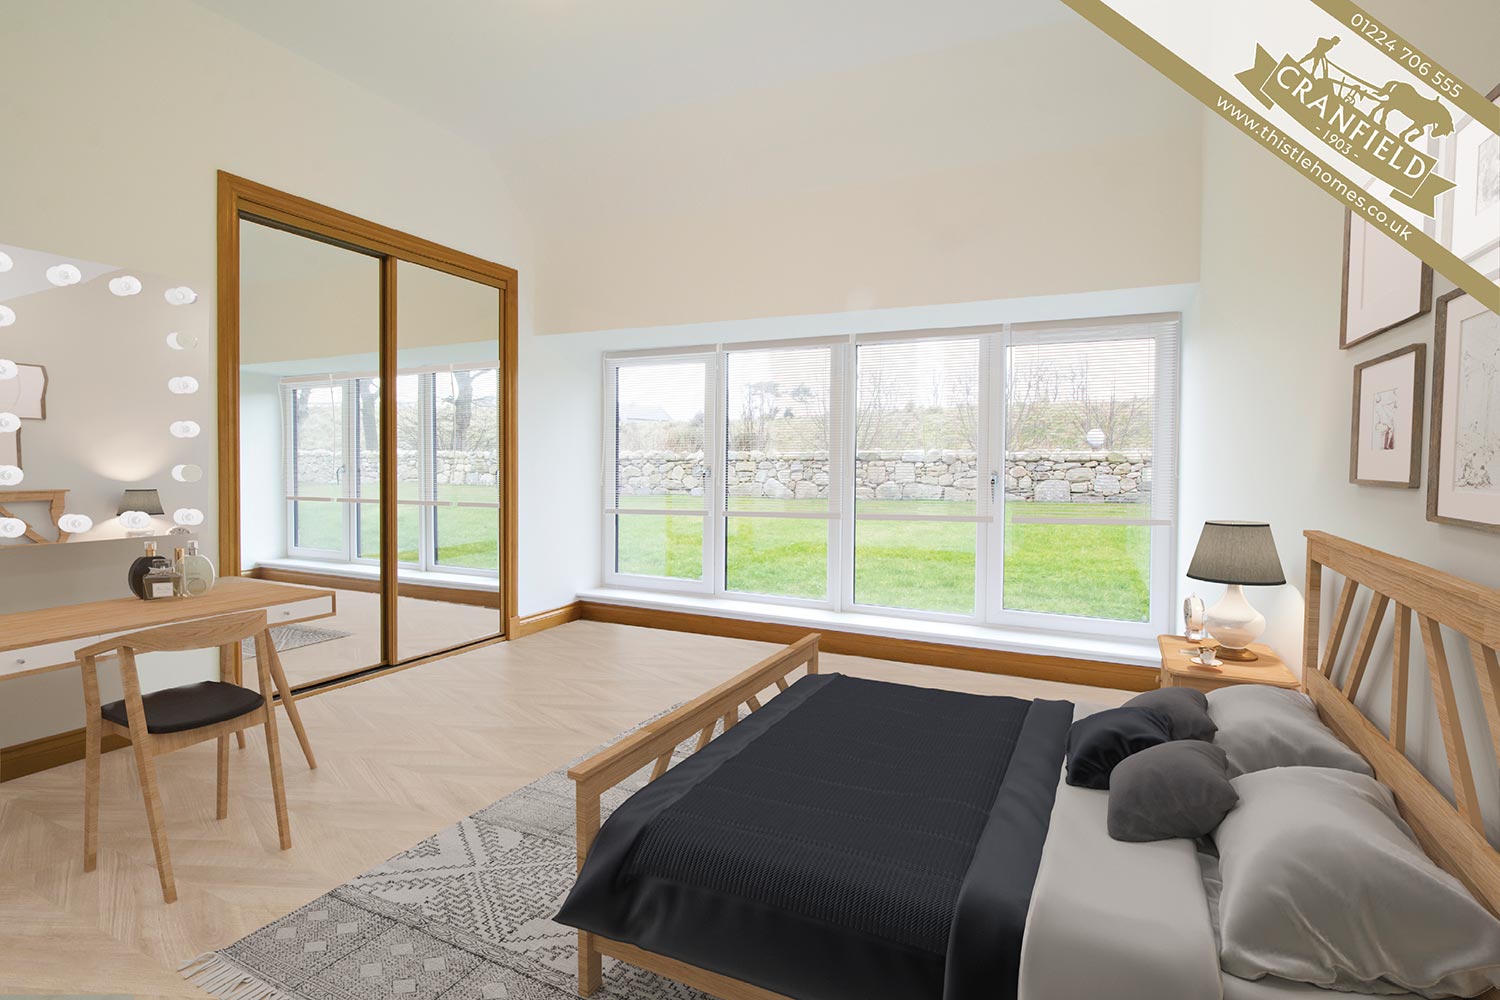 Cranfield by Thistle Homes Aberdeen: Plot 2 Bedroom 2 with Built-In Sliding Wardrobe (Virtual Furnishing)